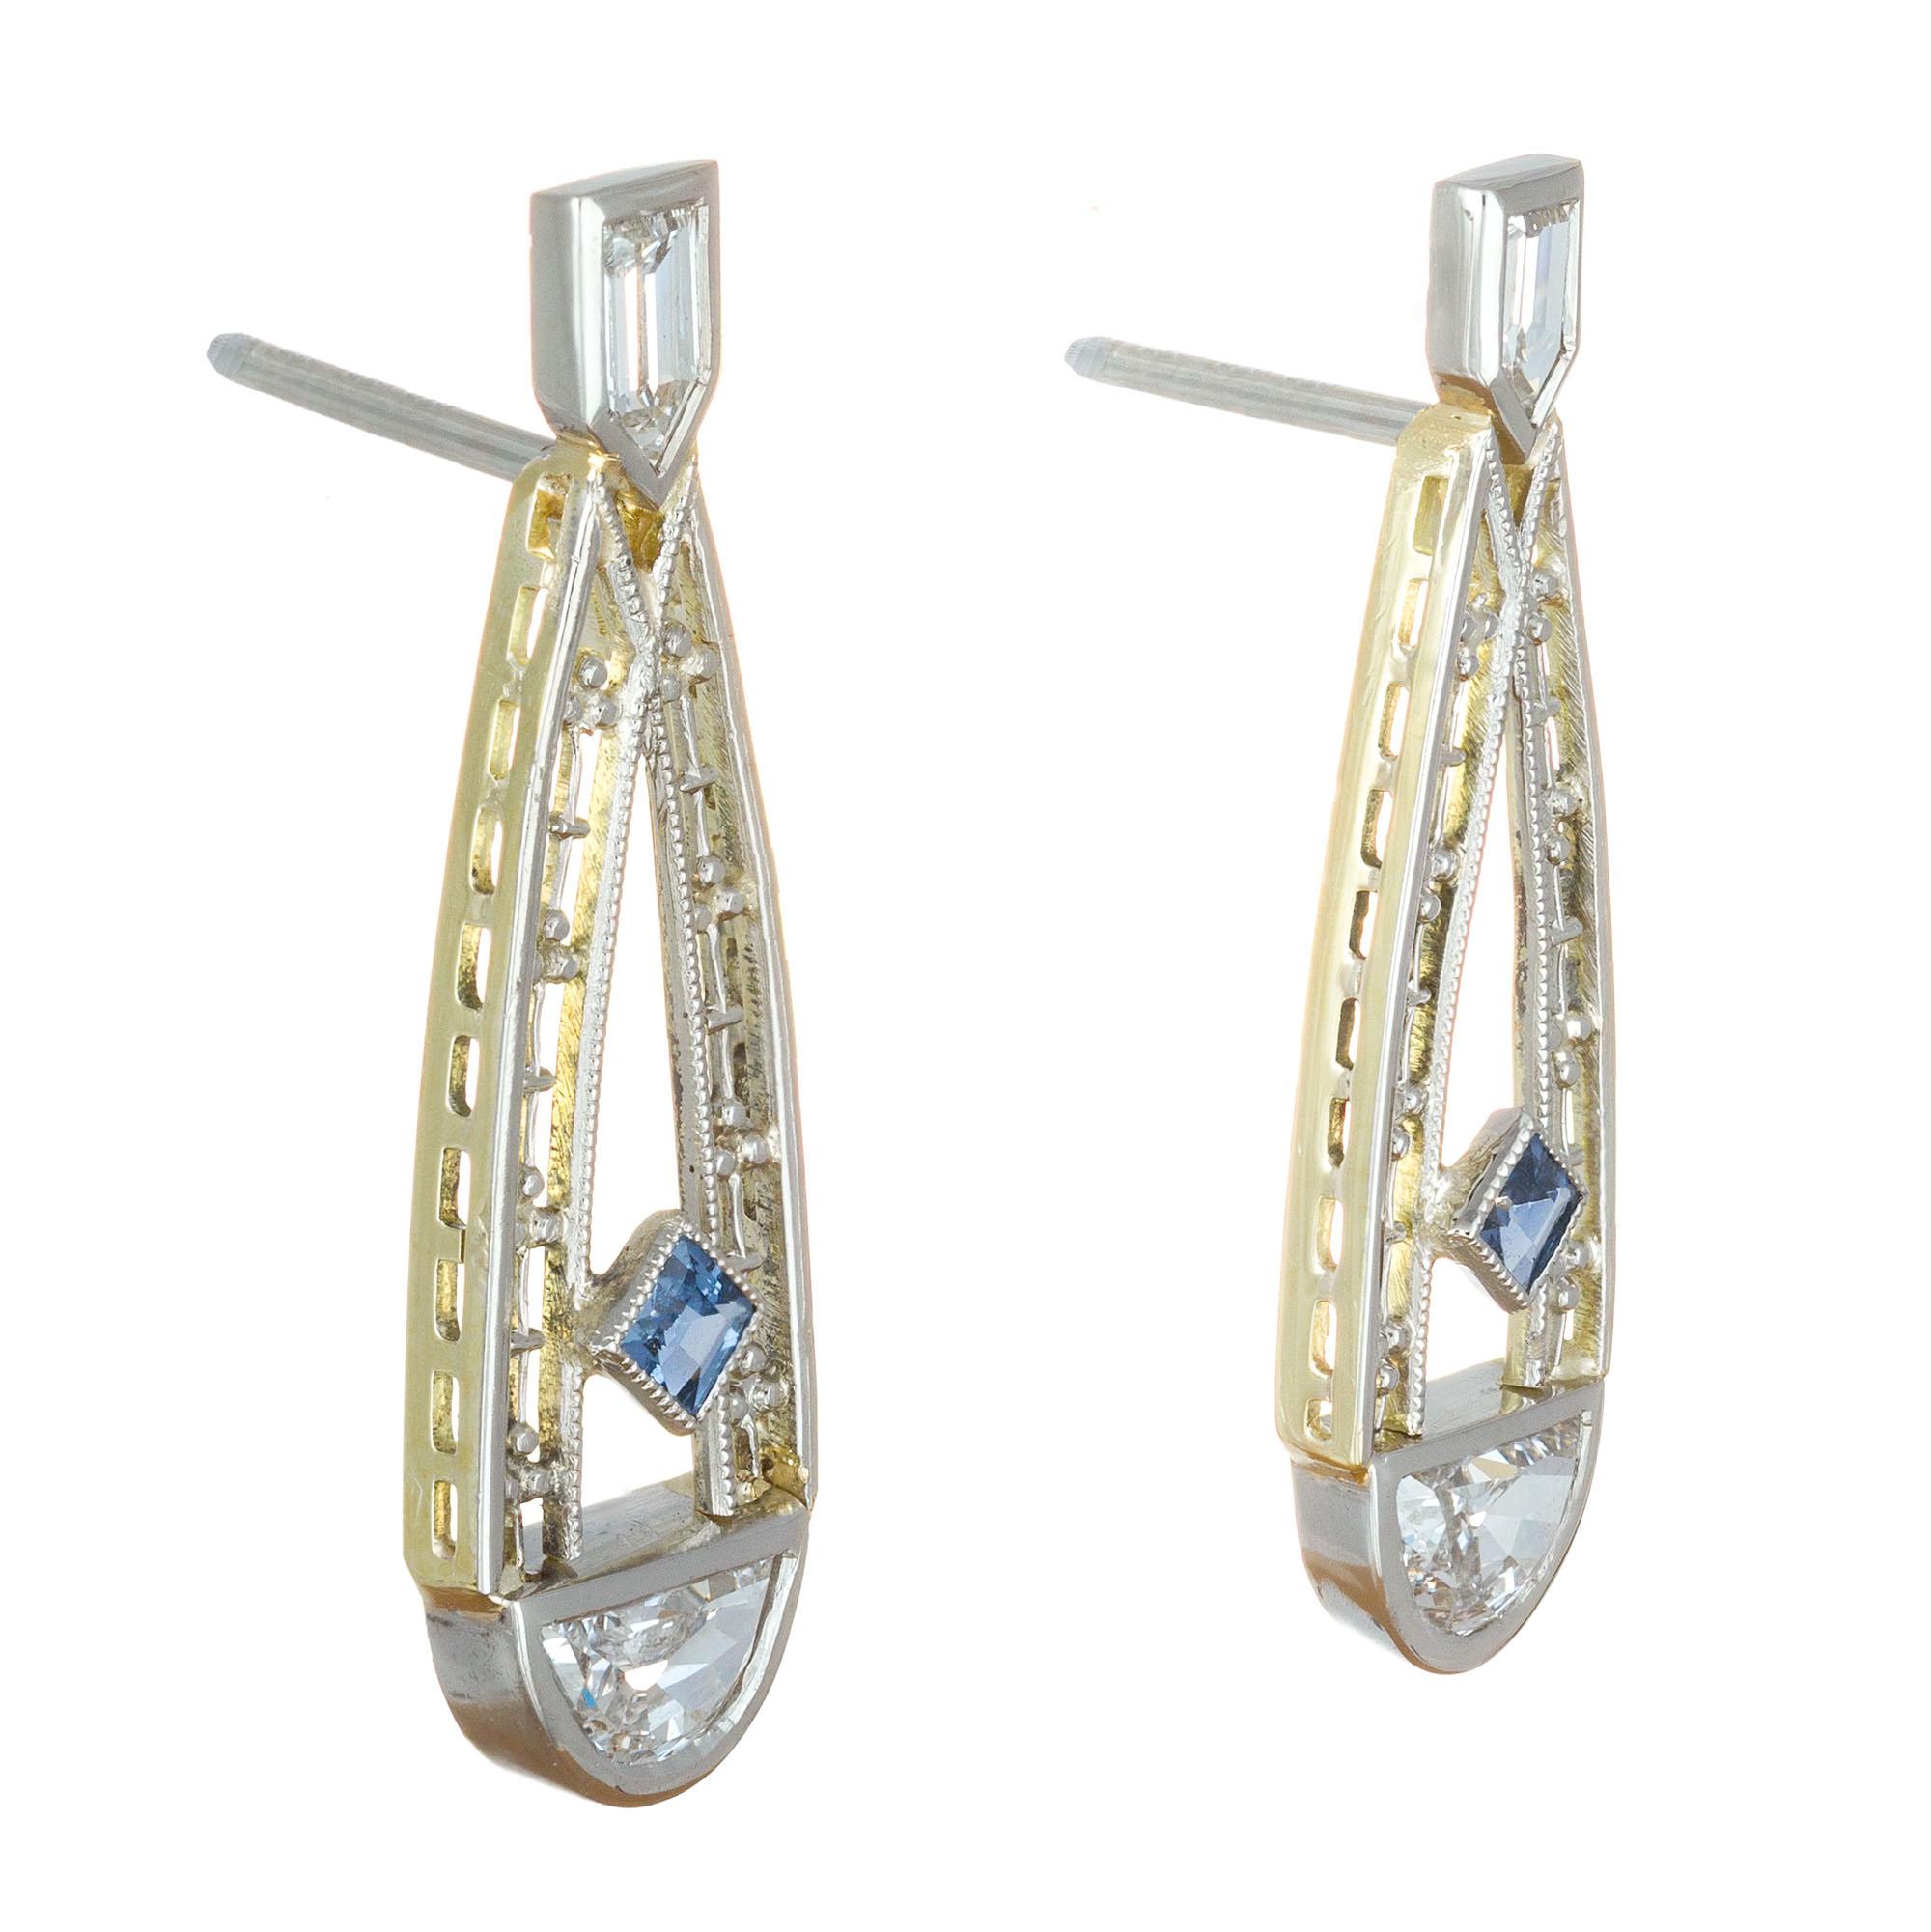 Early Art Deco platinum top on 14k yellow gold earrings set with two Montana square sapphires with two bullet shape and two half moon shape diamonds. Platinum posts. Circa 1915

2 half-moon shape diamonds H VS, approx. .65ct
2 bullet shape diamonds